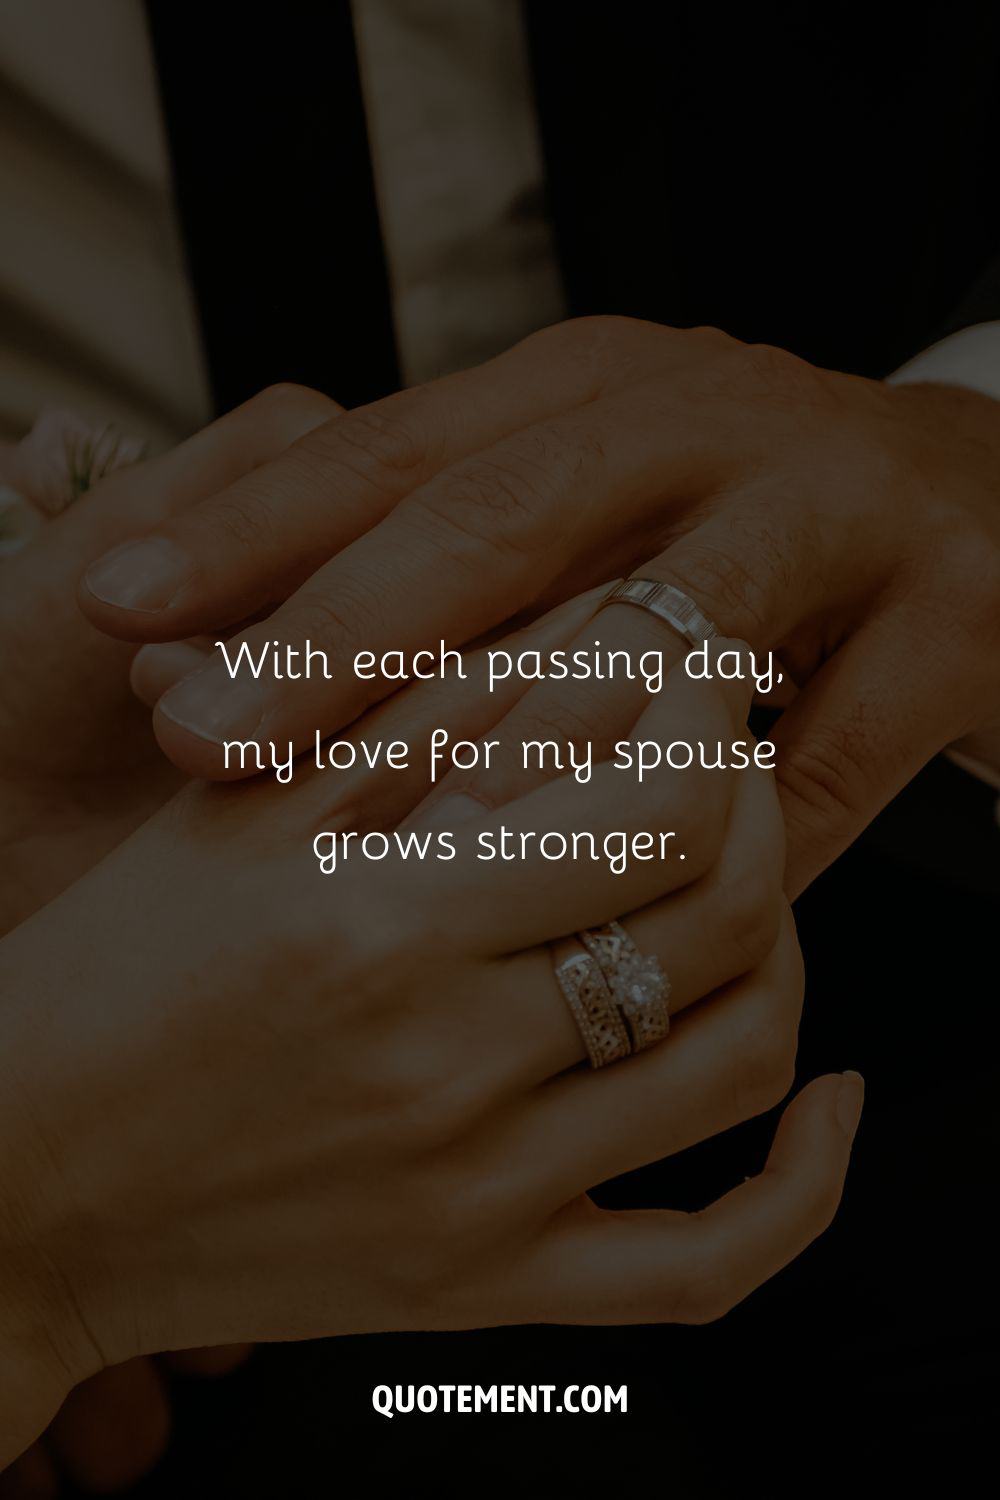 Image of hands with rings representing marriage affirmation.